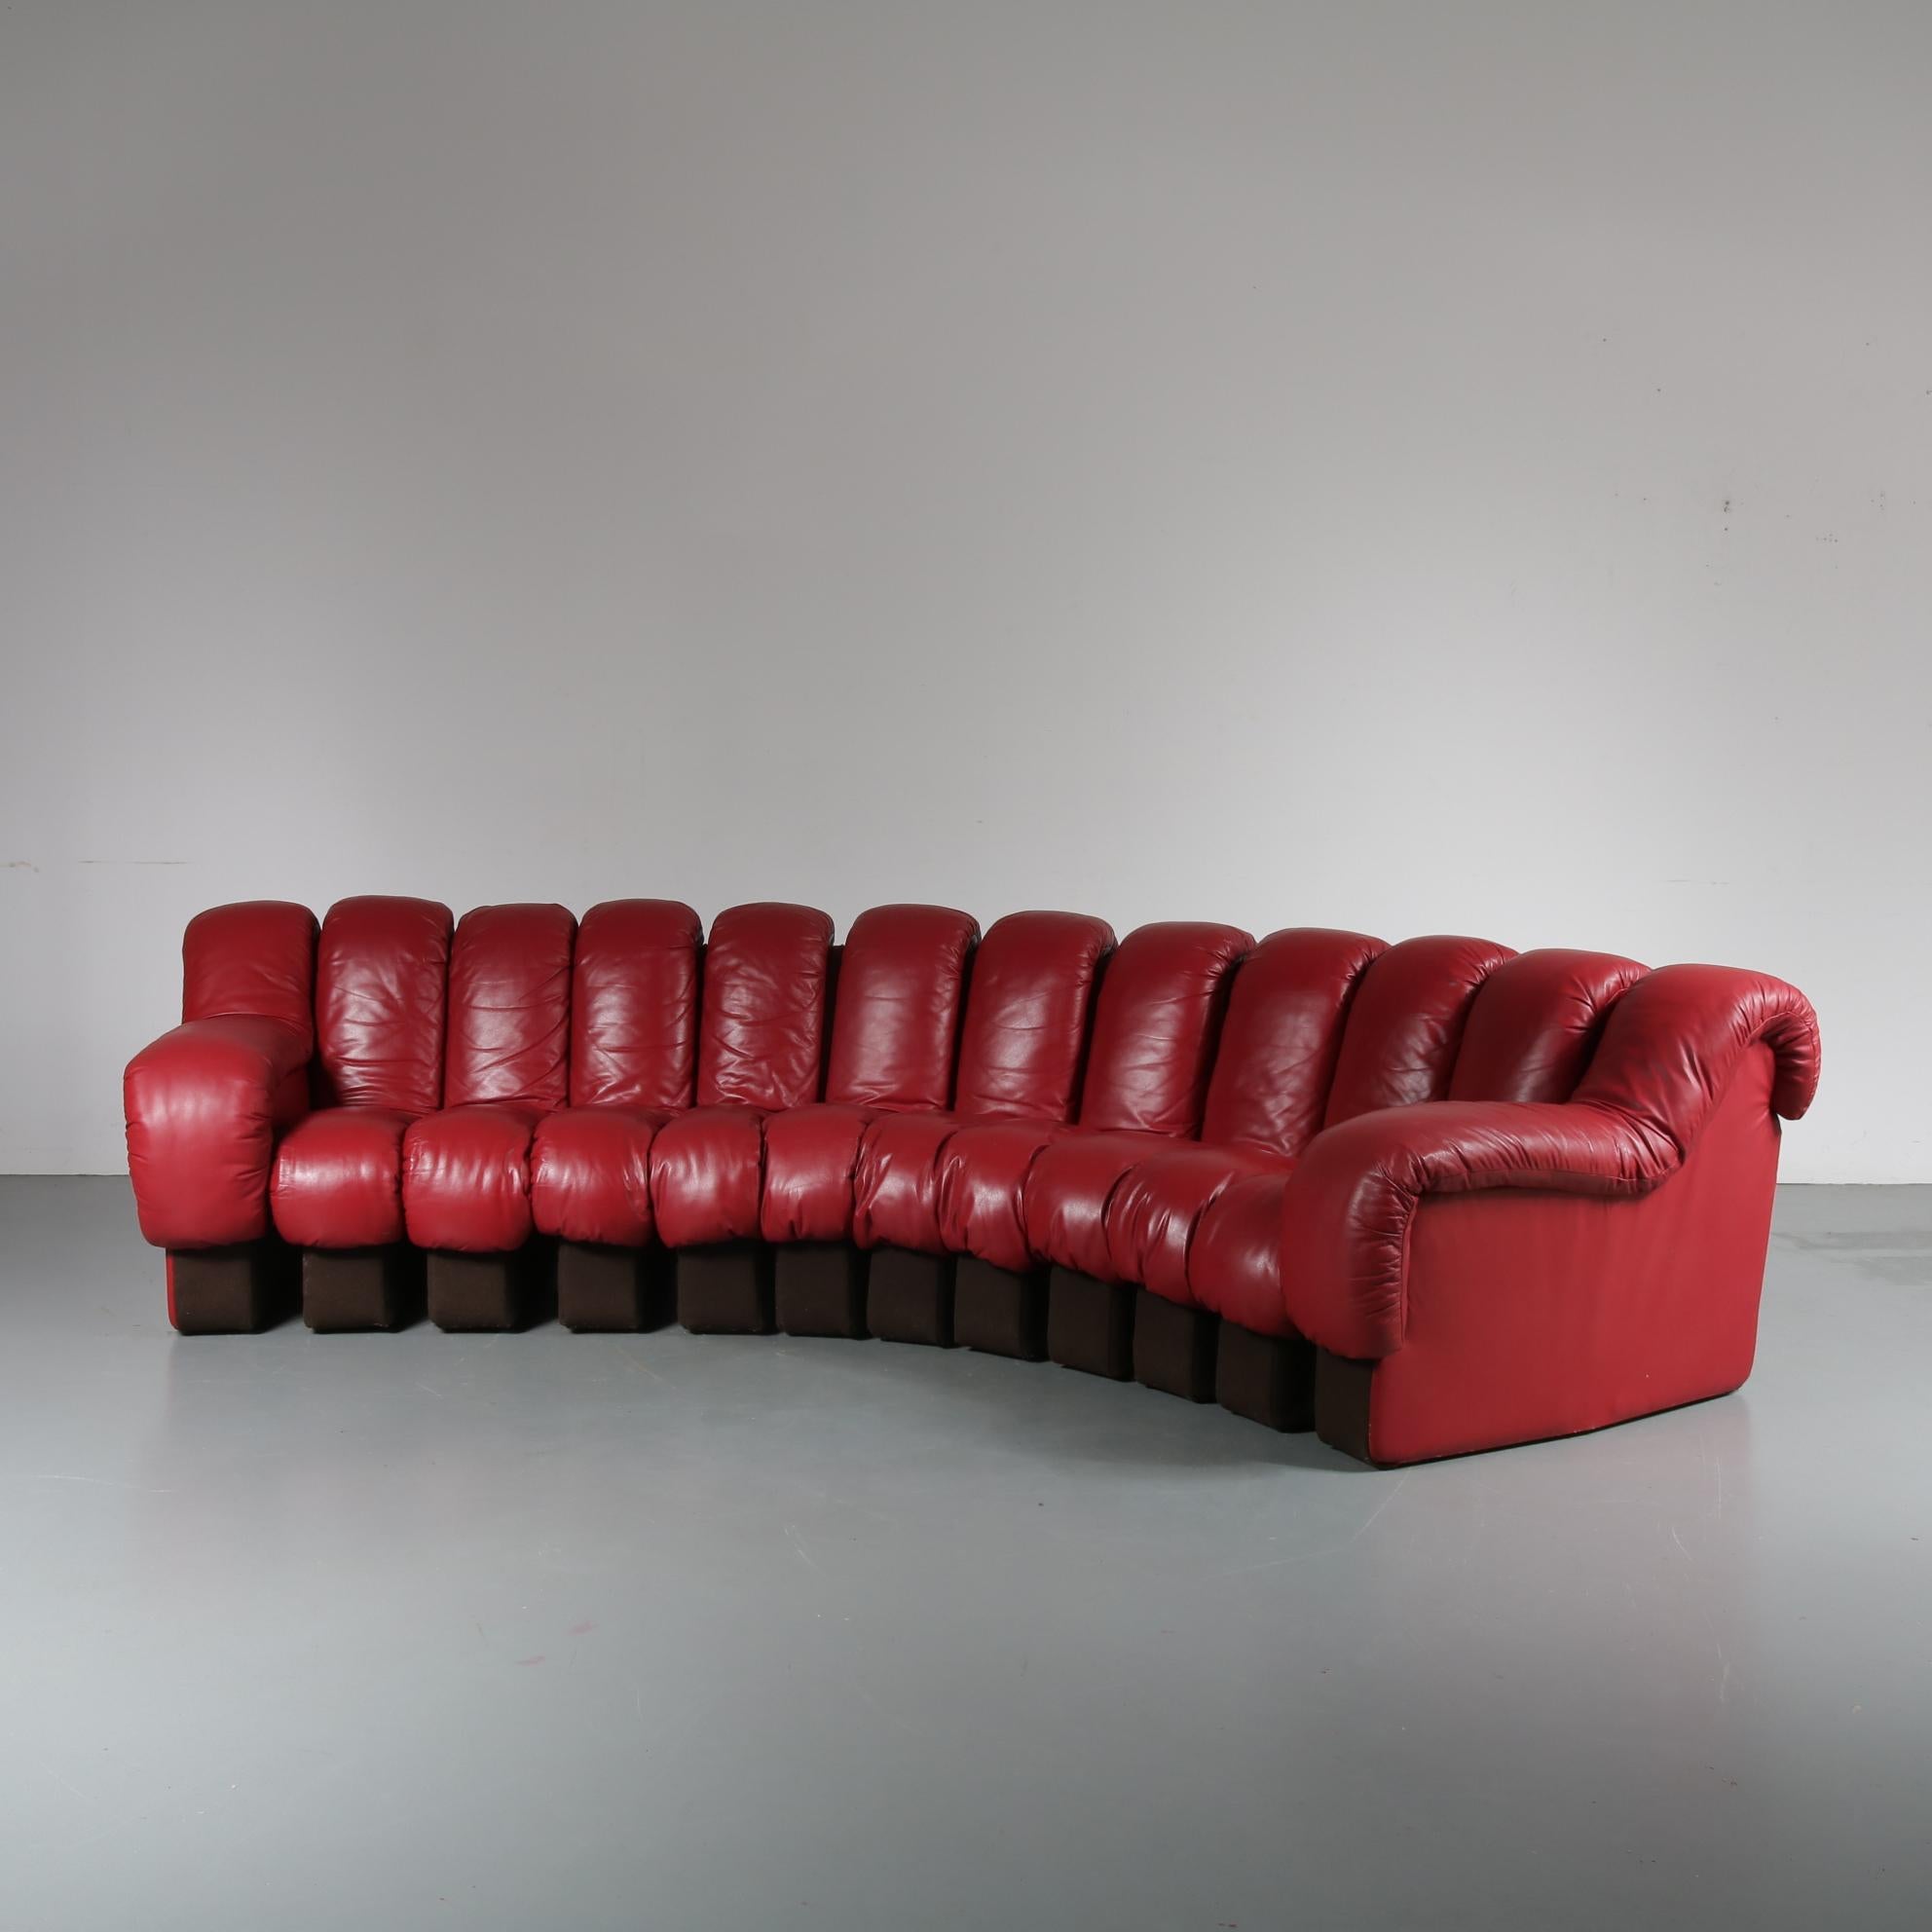 An impressive DS-600 modular sectional sofa, manufactured by De Sede in Switzerland, circa 1960.

Made of high quality, eye-catching deep red leather with brown fabric base. This combination of materials creates a very luxurious and highly